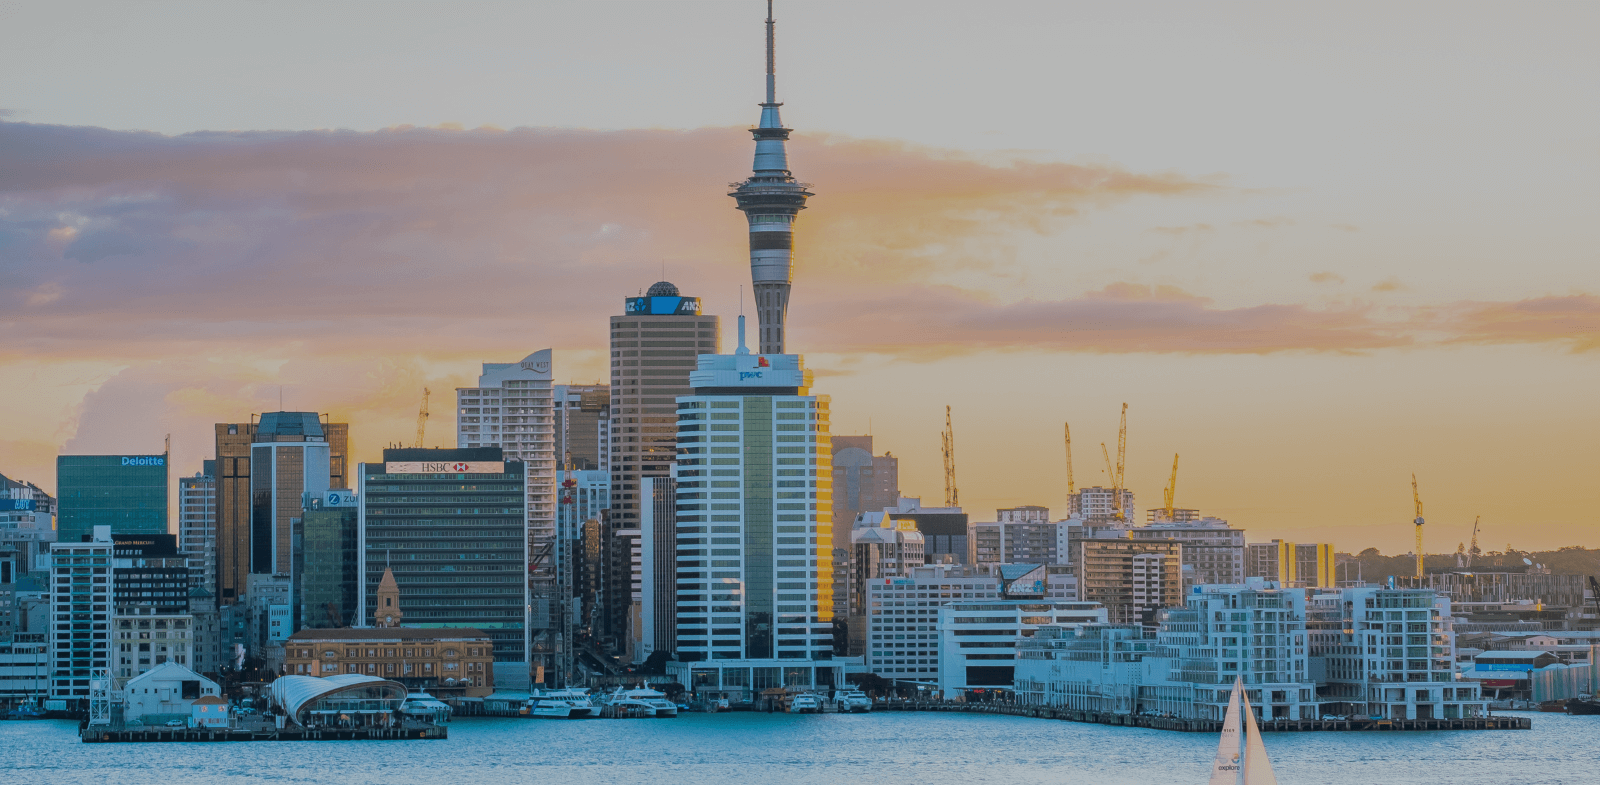 Shot of Auckland City skyline with Skytower